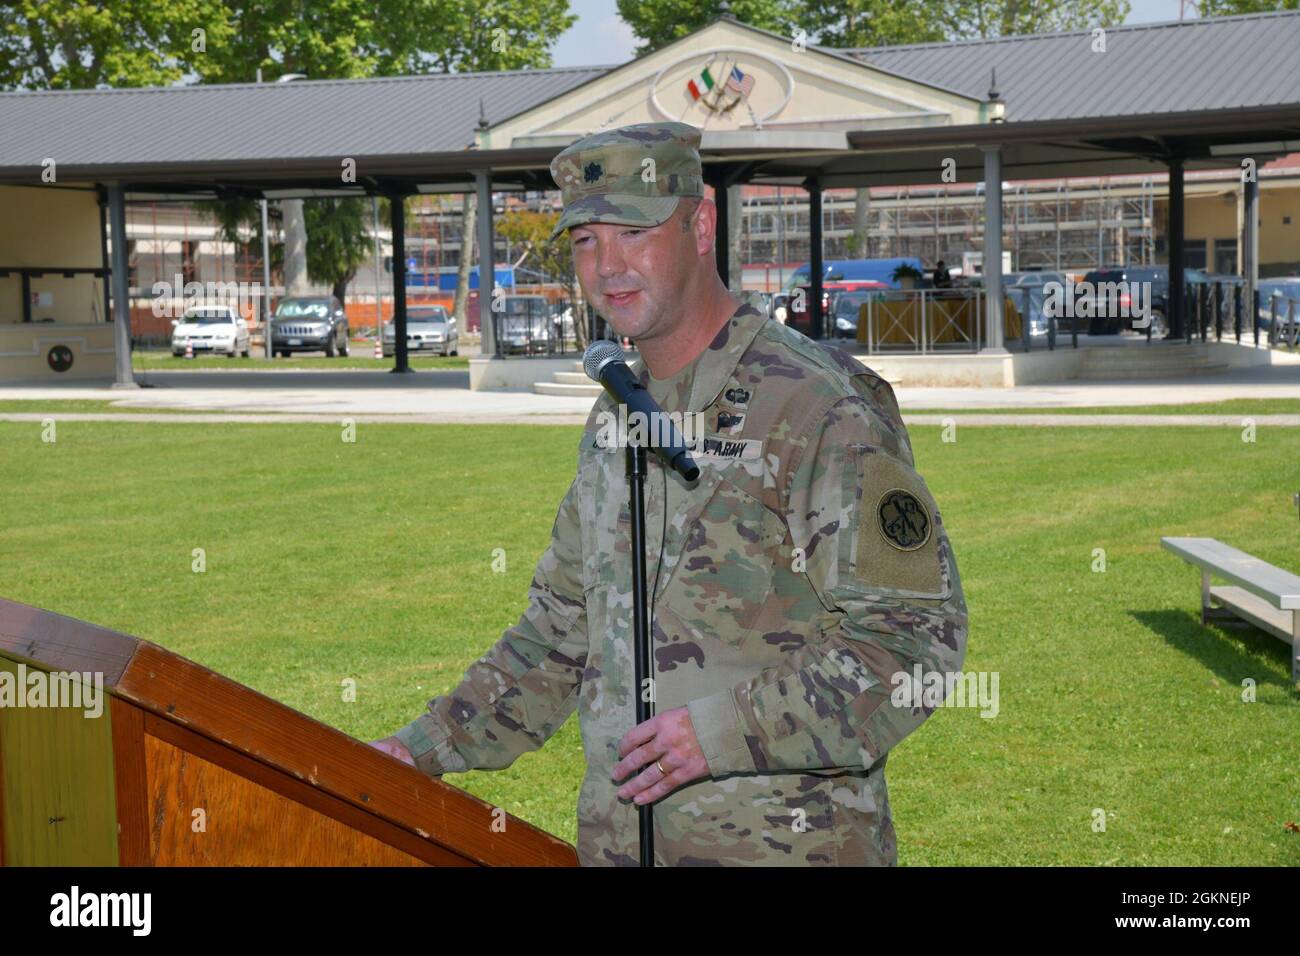 Lt. Col. Jesse G. Chace, the outgoing commander of the 307th Military Intelligence Battalion, provides remarks during a change of command ceremony for the 307th Military Intelligence Battalion at Caserma Ederle in Vicenza, Italy, June 4, 2021. Stock Photo